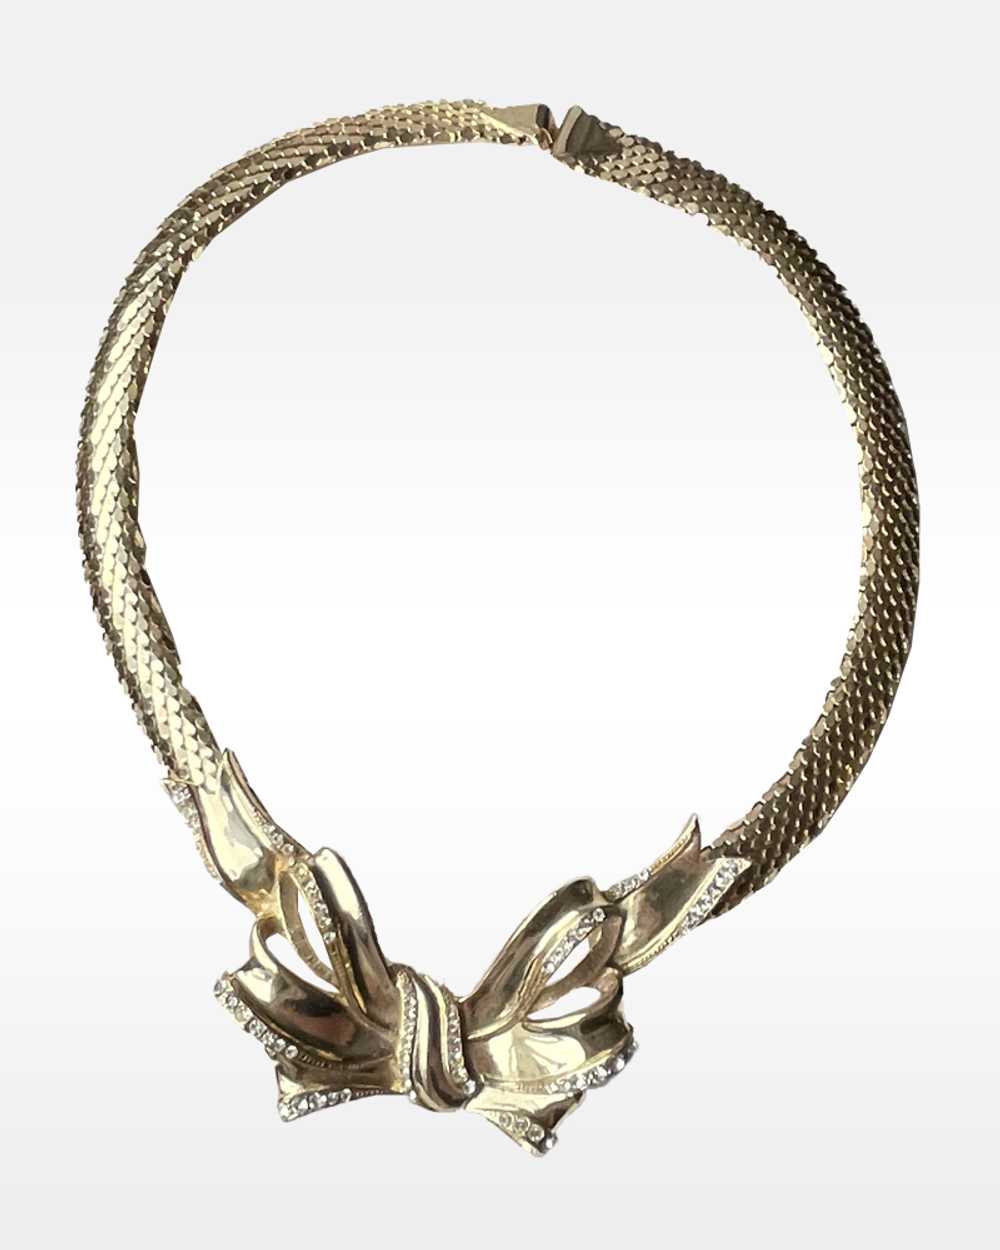 Whiting and Davis Gold and Rhinestone Bow Necklace - image 3